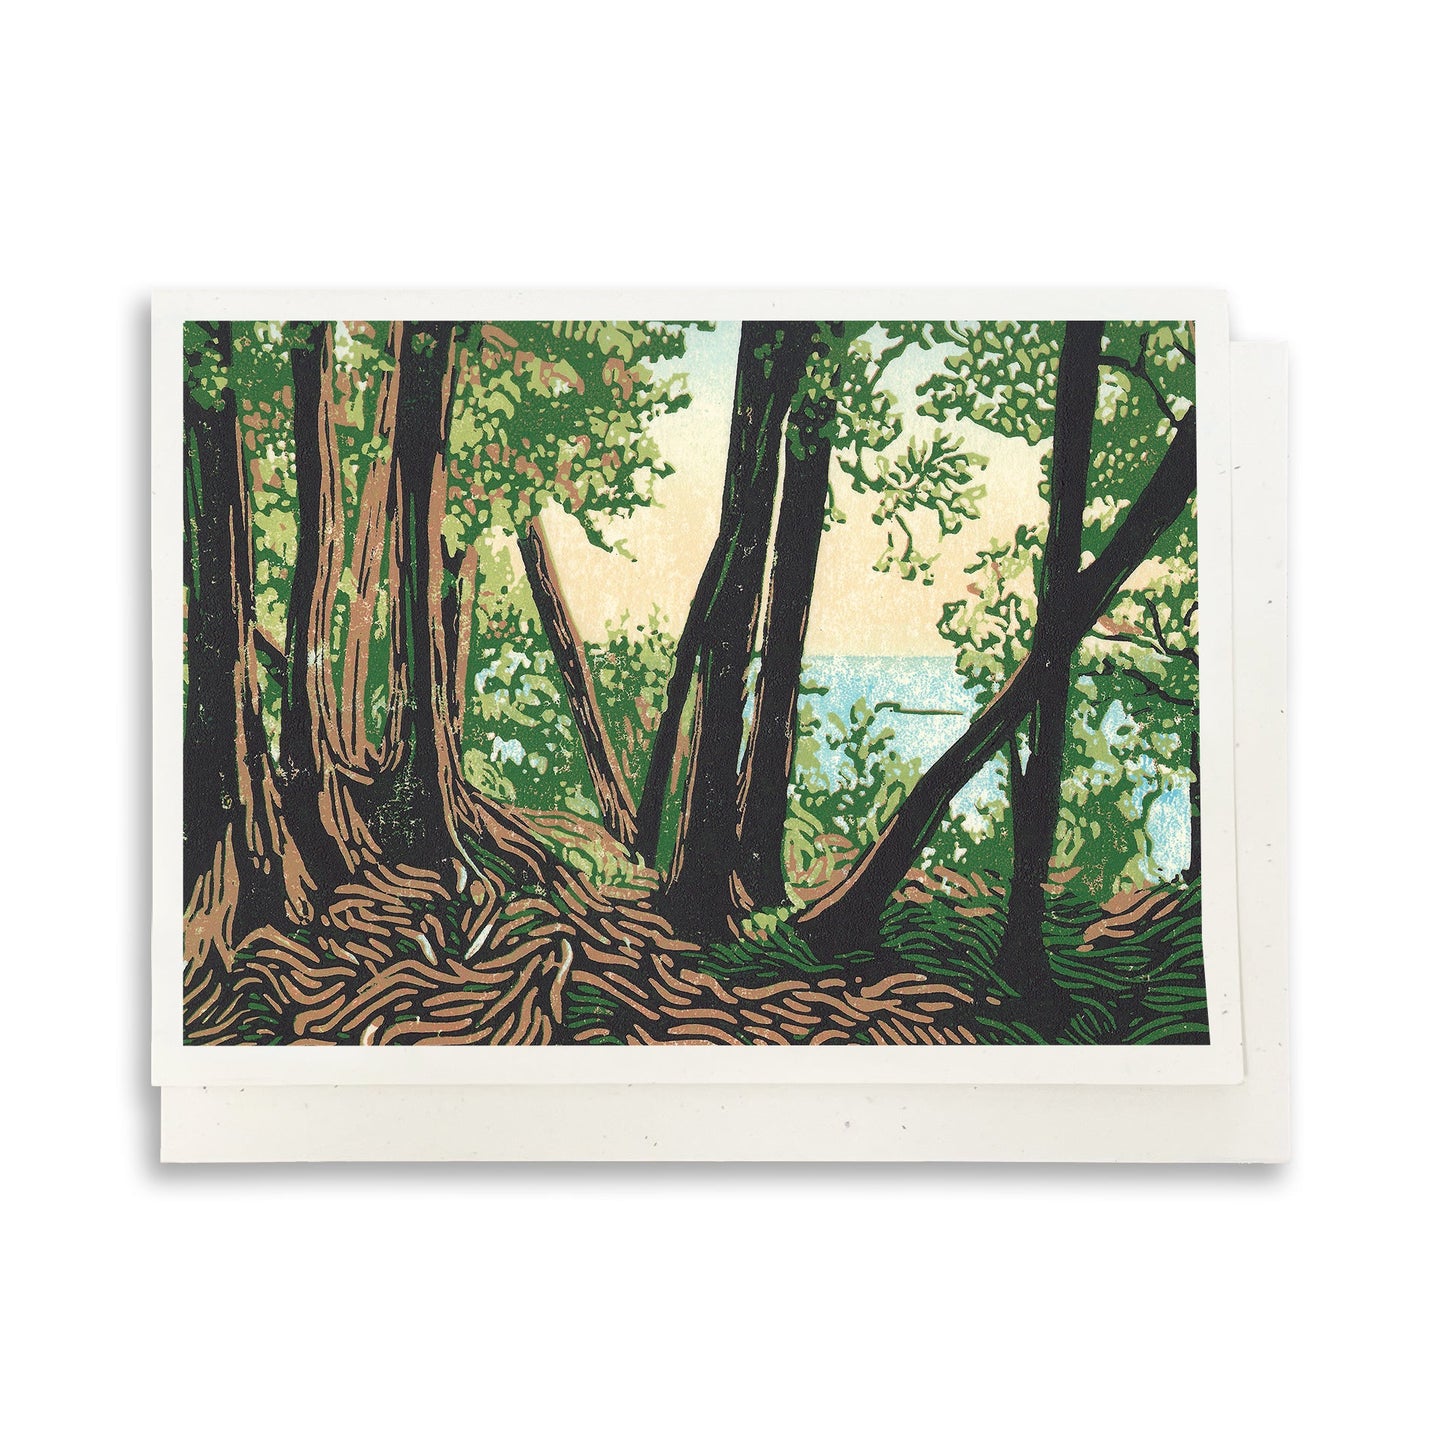 Trail Lookout greeting card by Natalia Wohletz of Peninsula Prints.